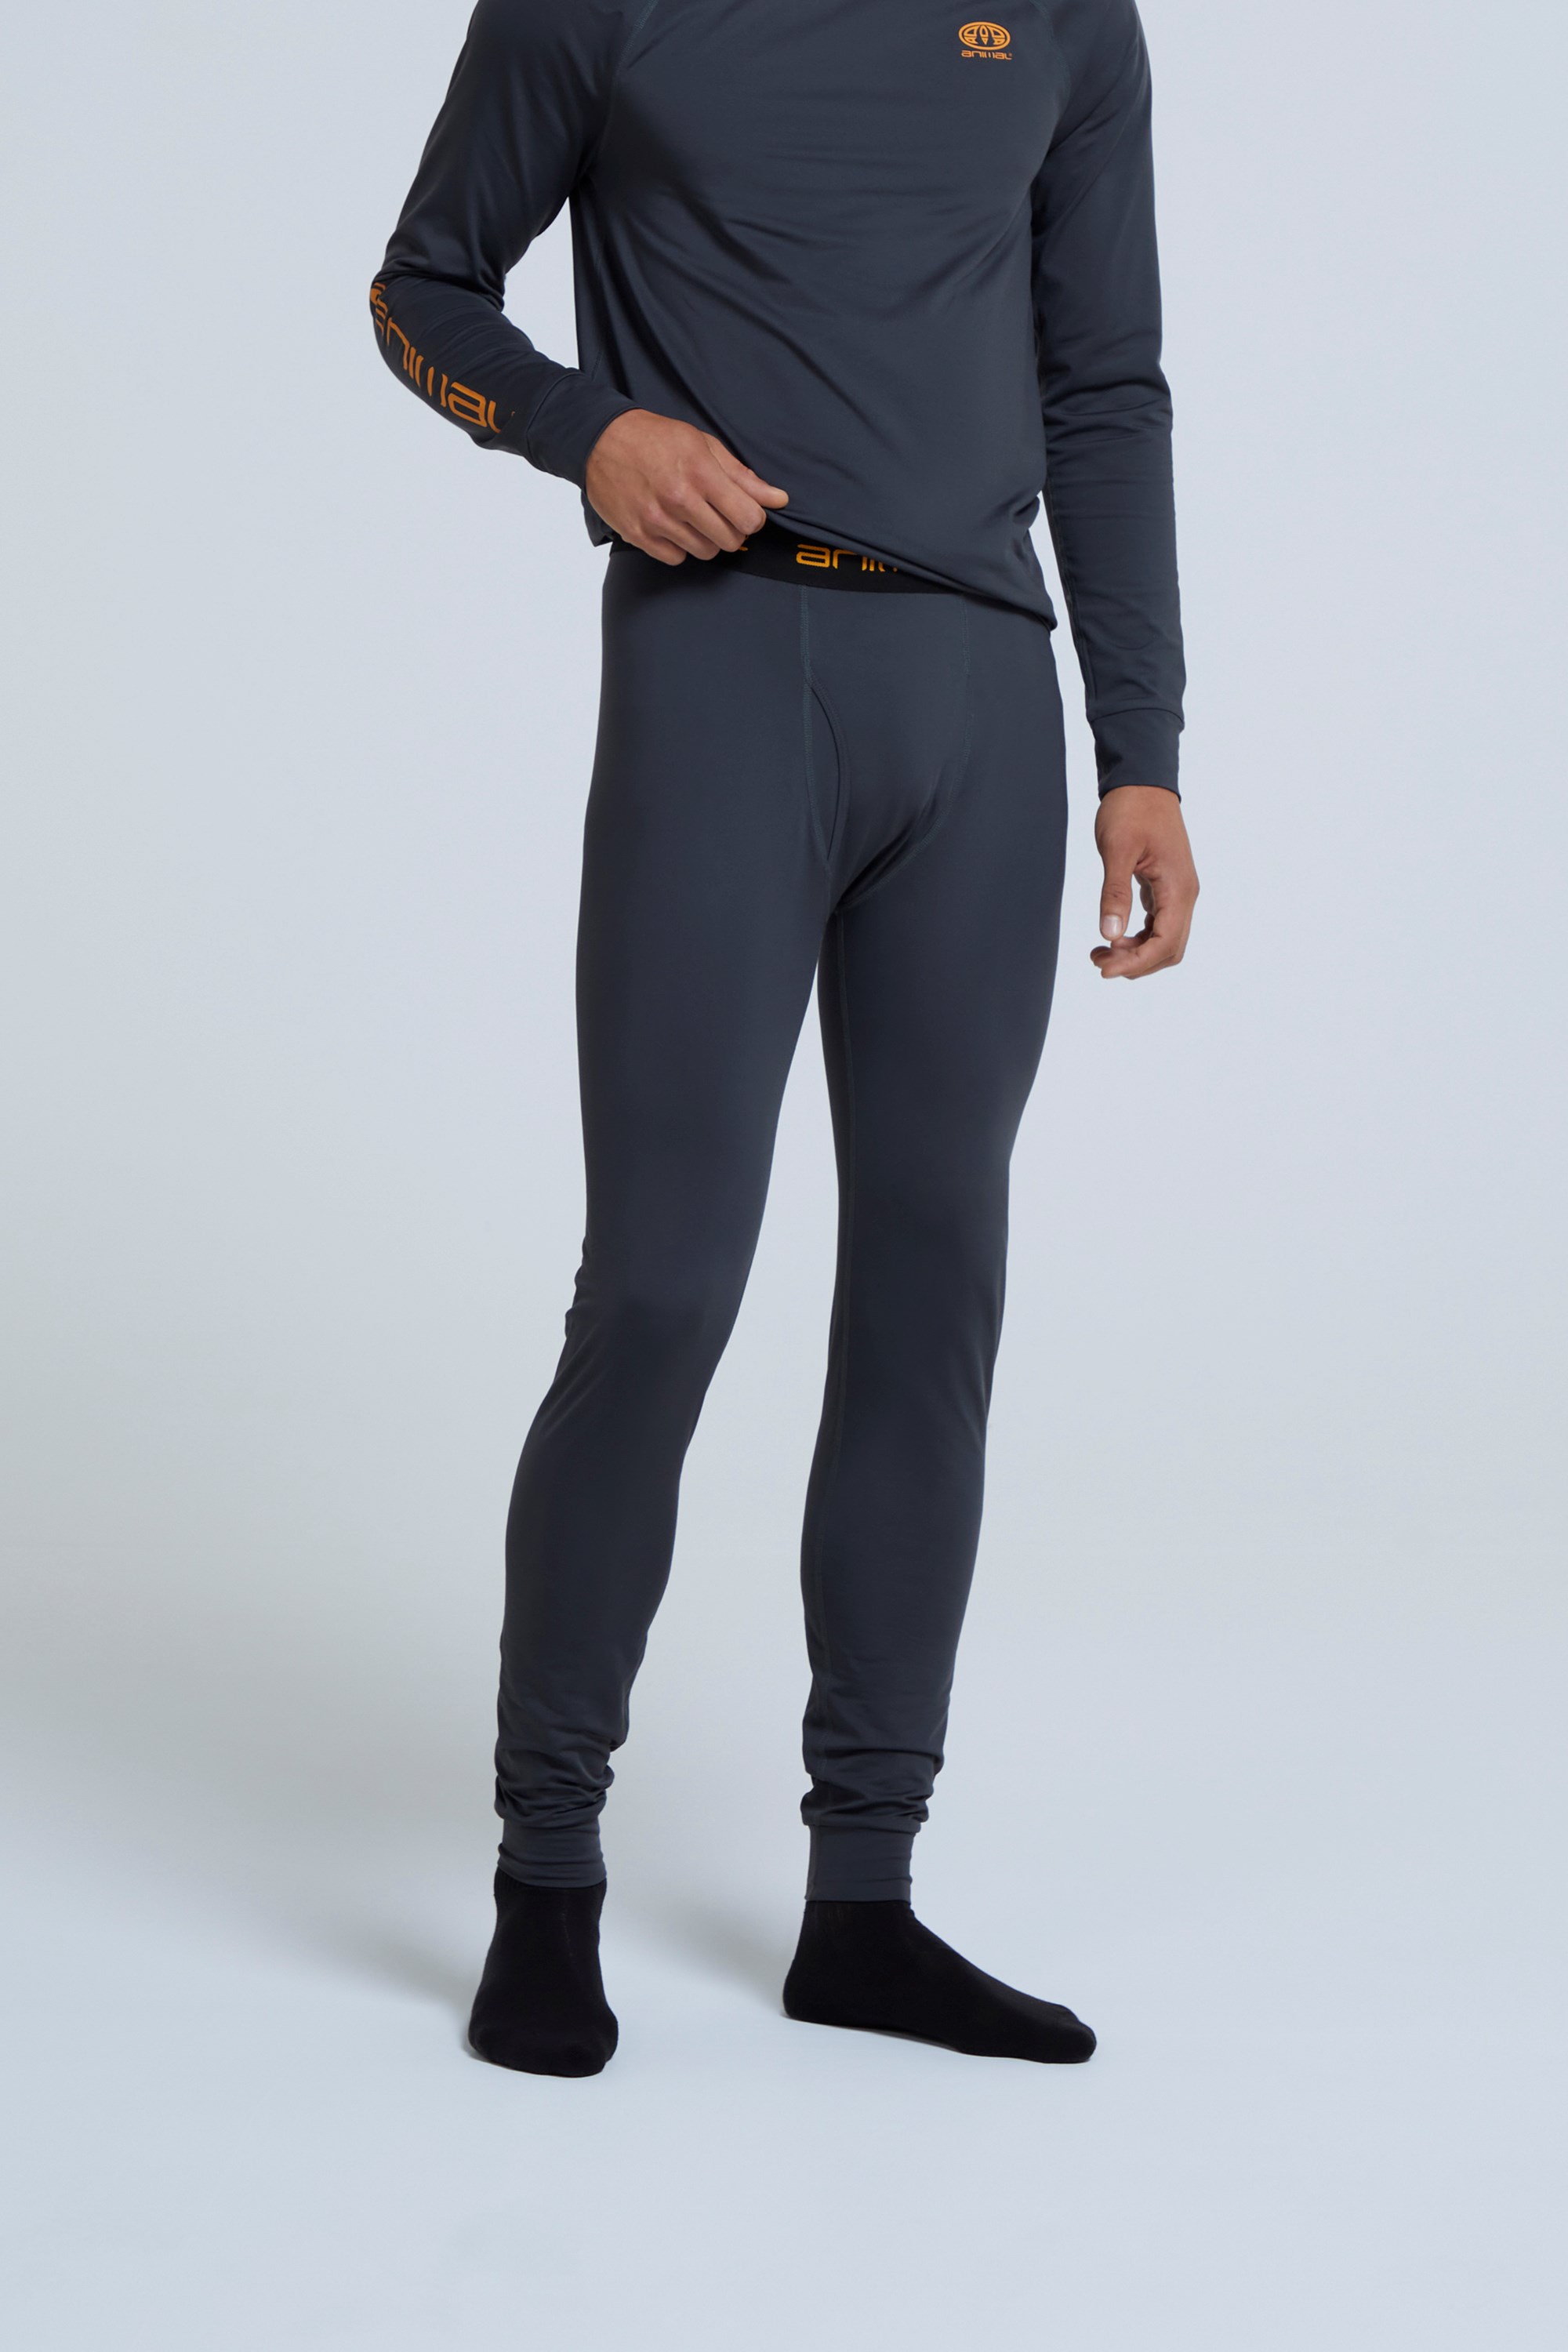 Off Piste Mens Recycled Base Layer Leggings - Grey